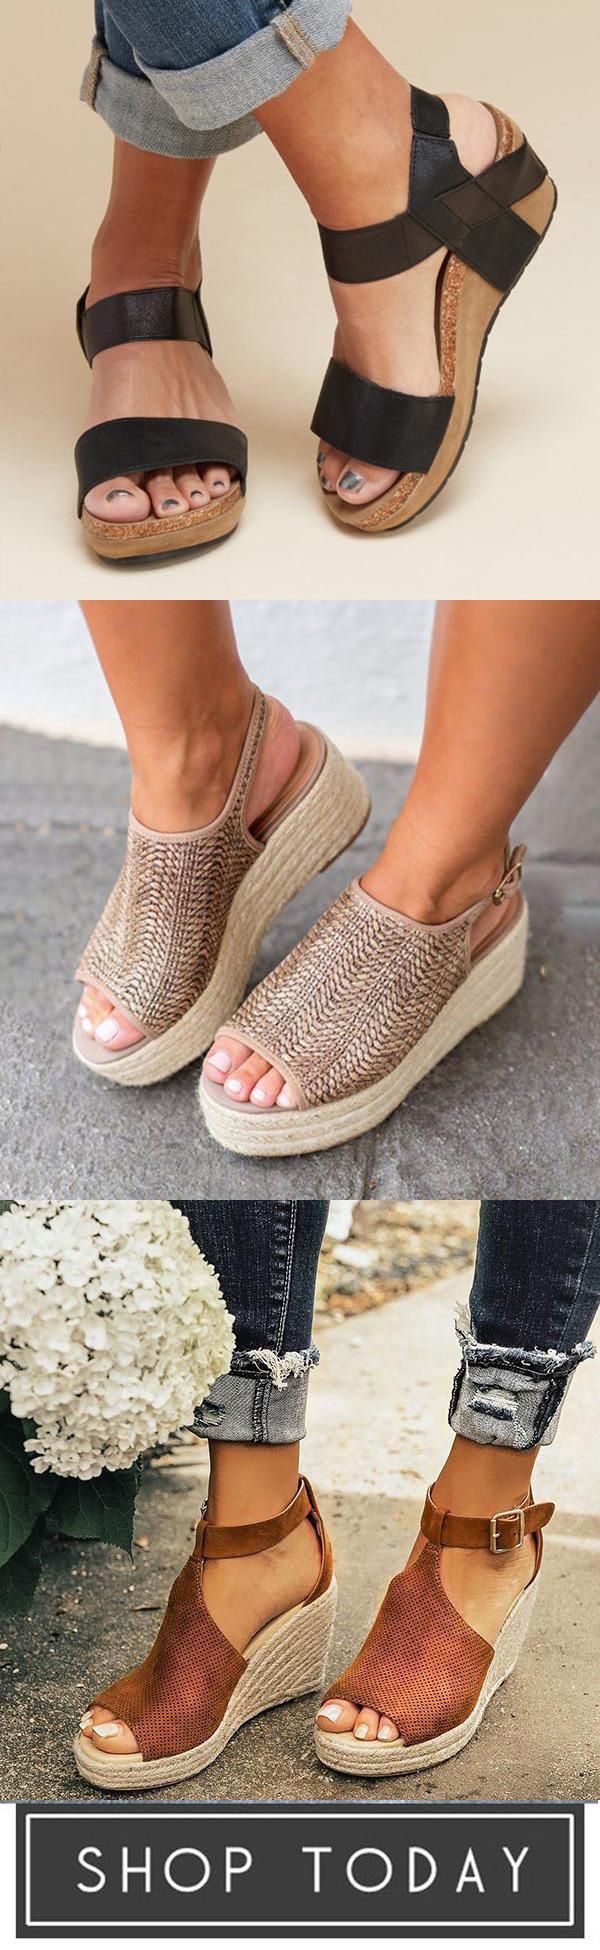 Super Cute Sandals -   21 indie style formal
 ideas